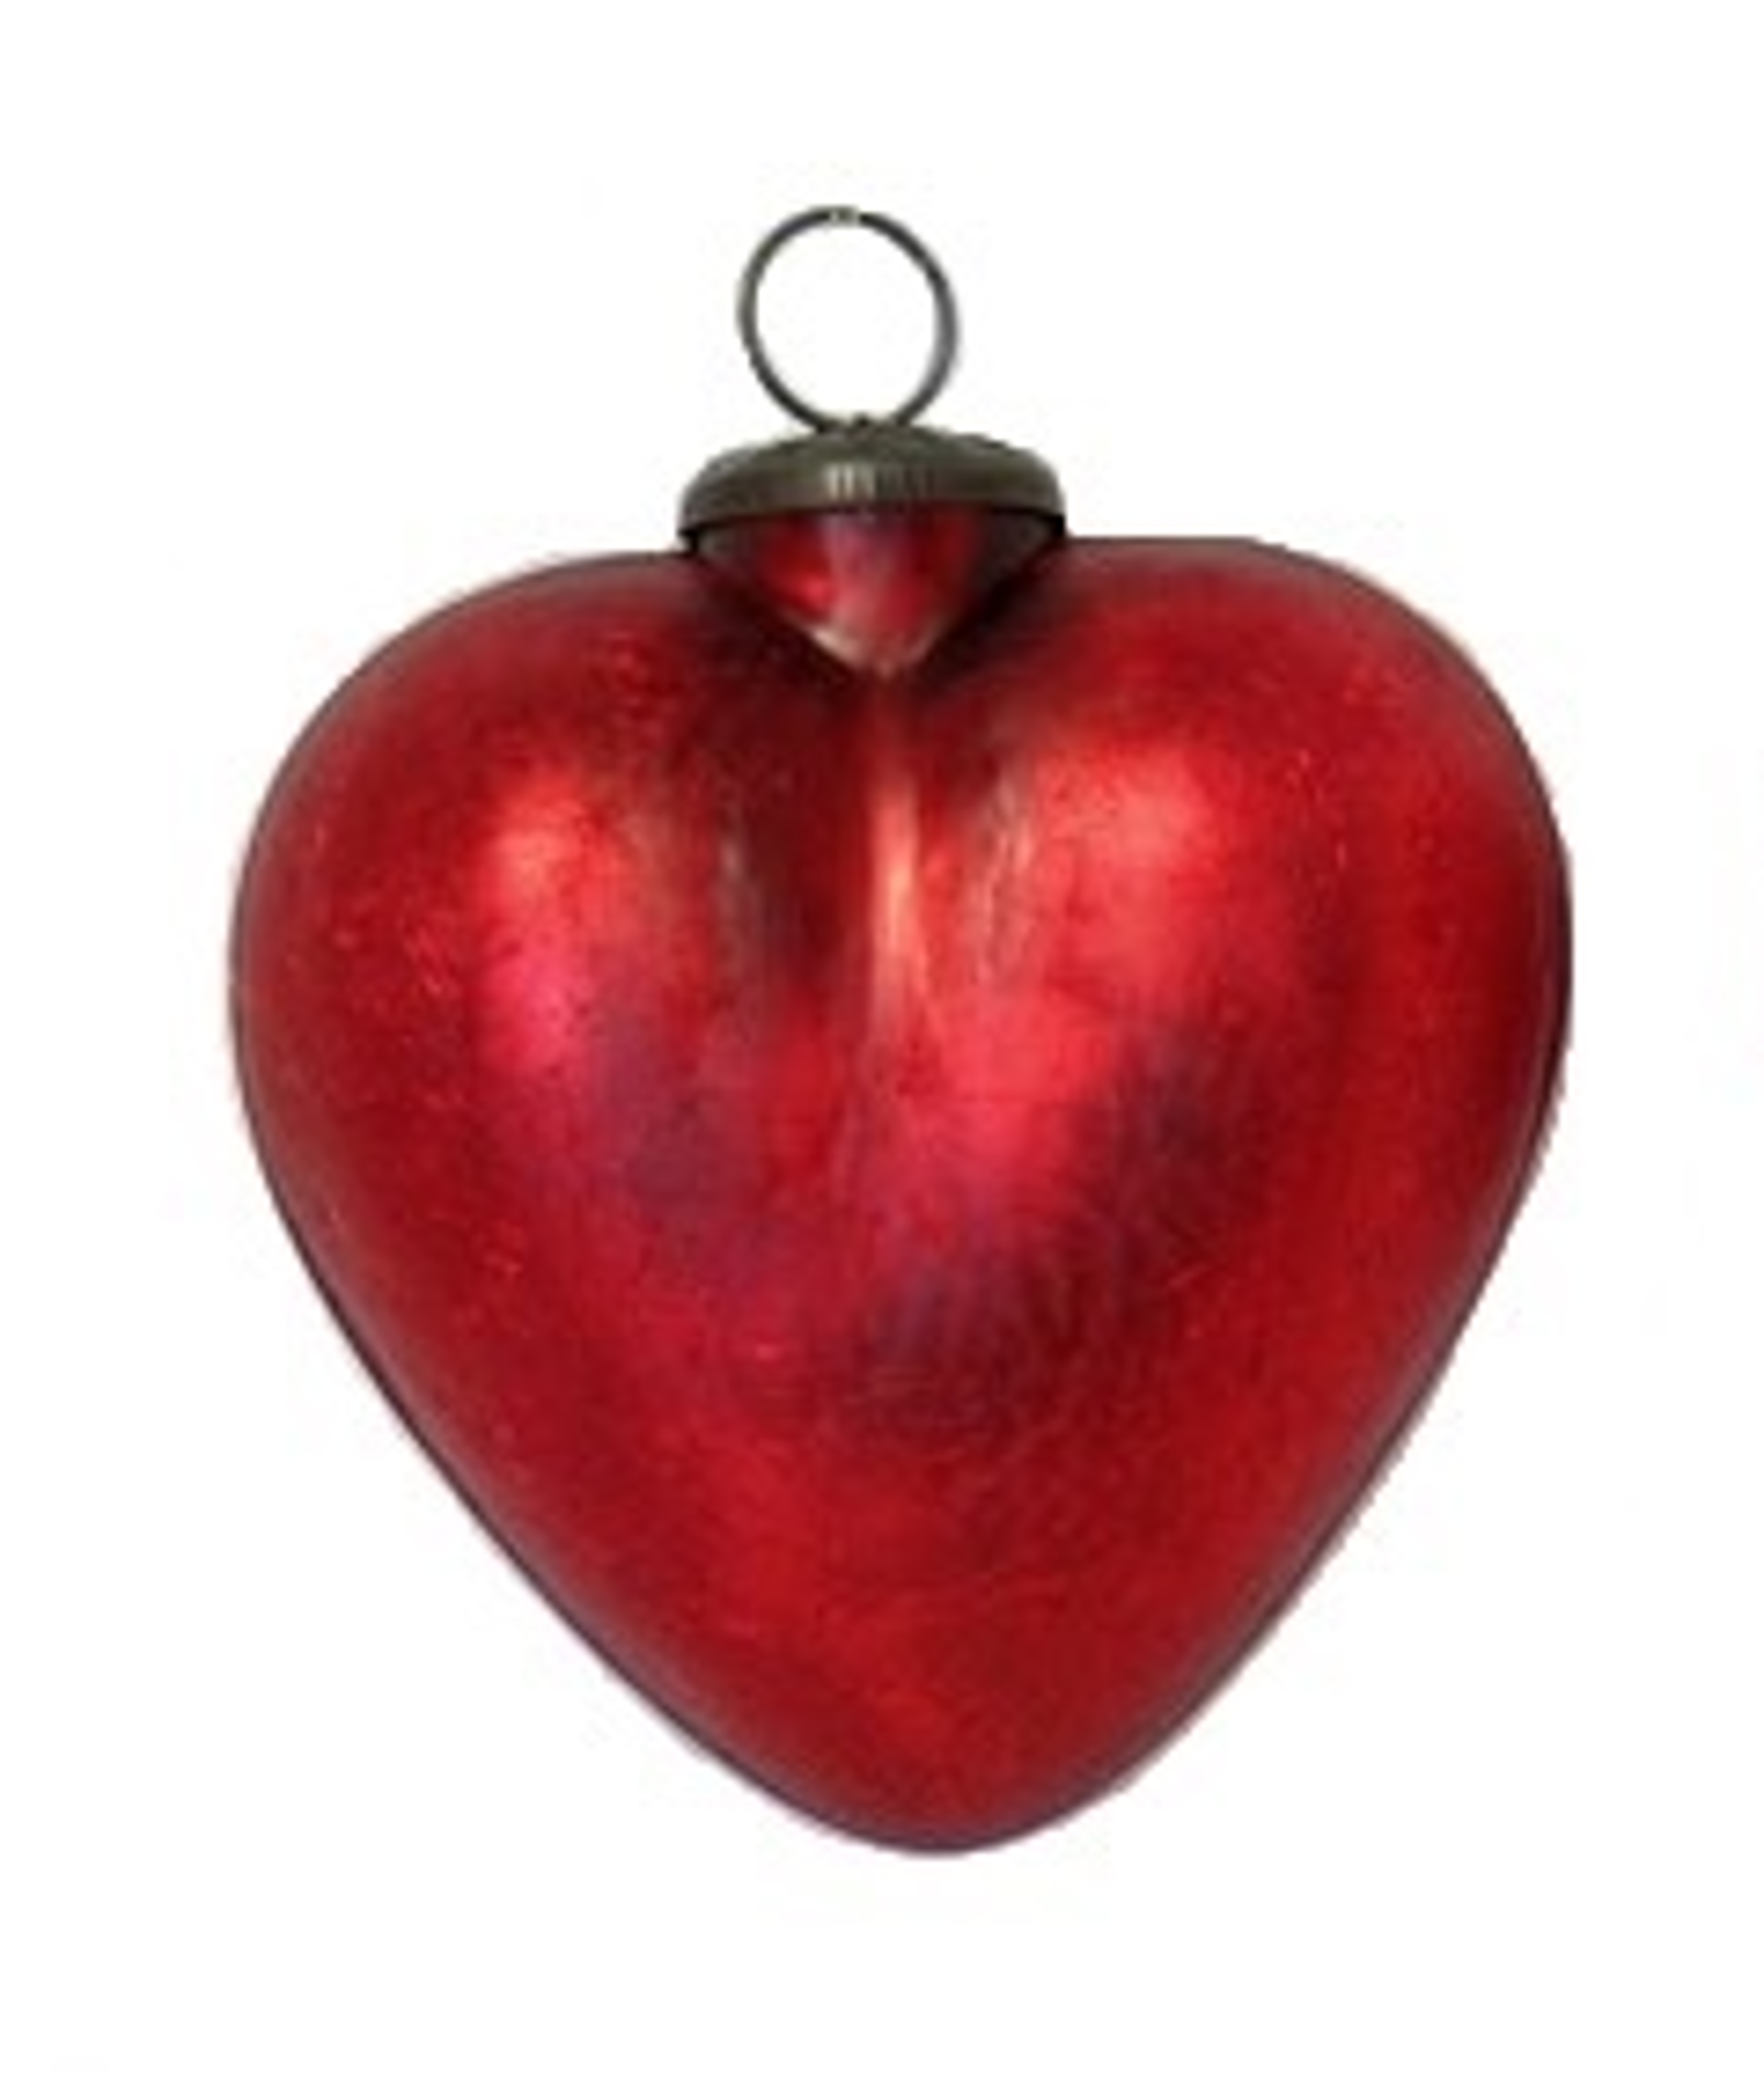 Ornament - 3" Red Matte Heart by Indigo Desert Ranch - Day of the Dead